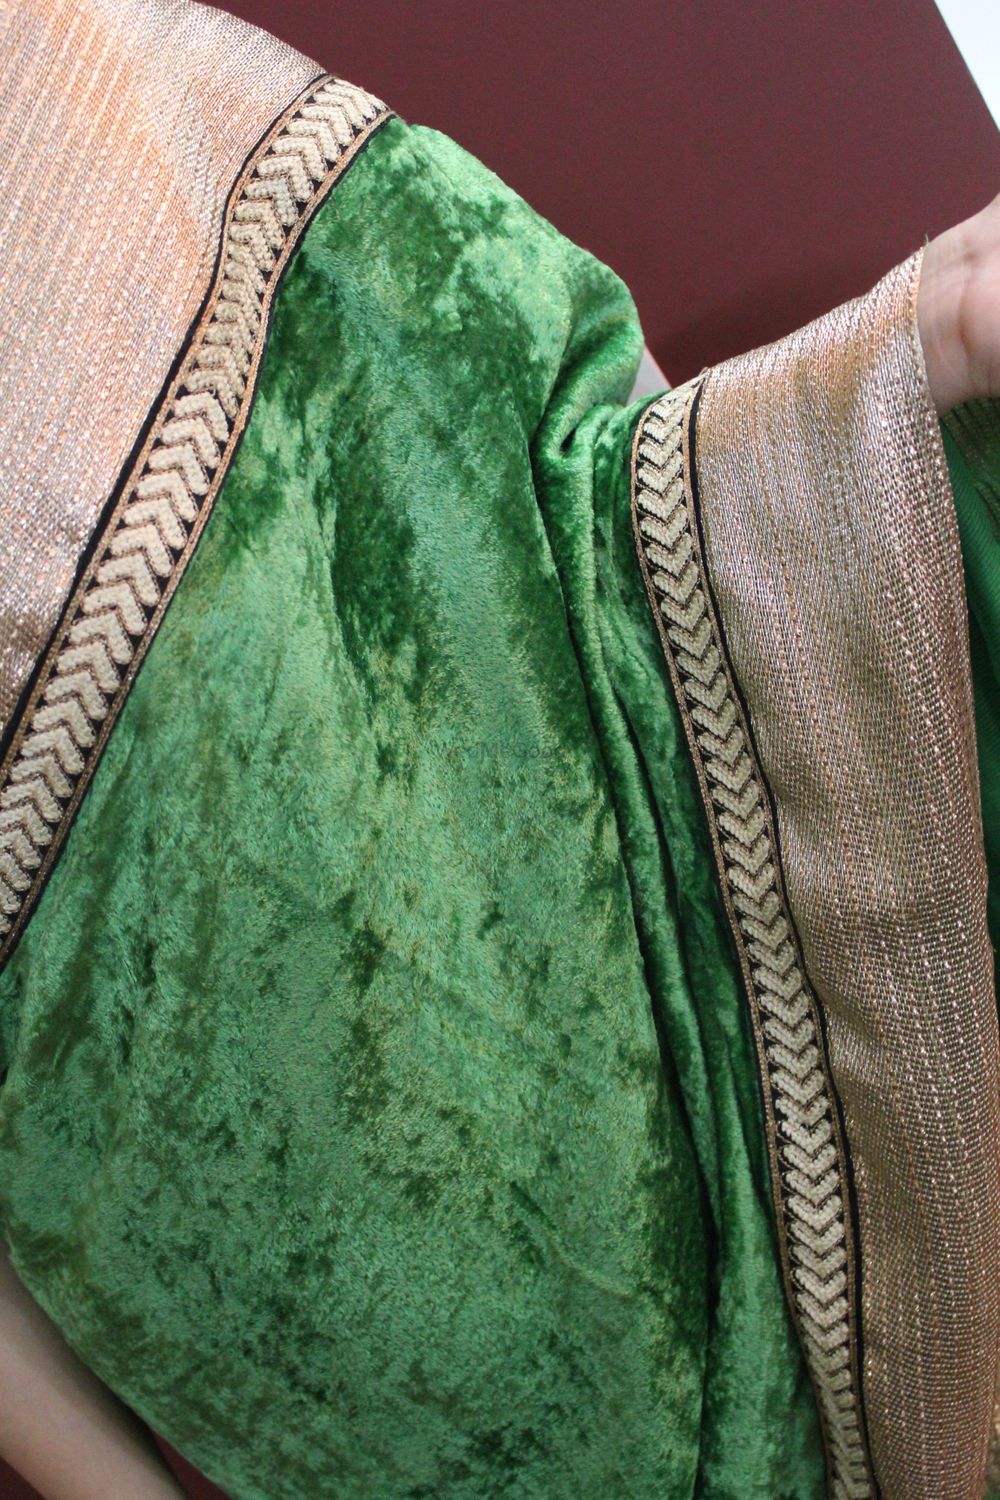 Photo From Green & Gold saree - By Paridhaa